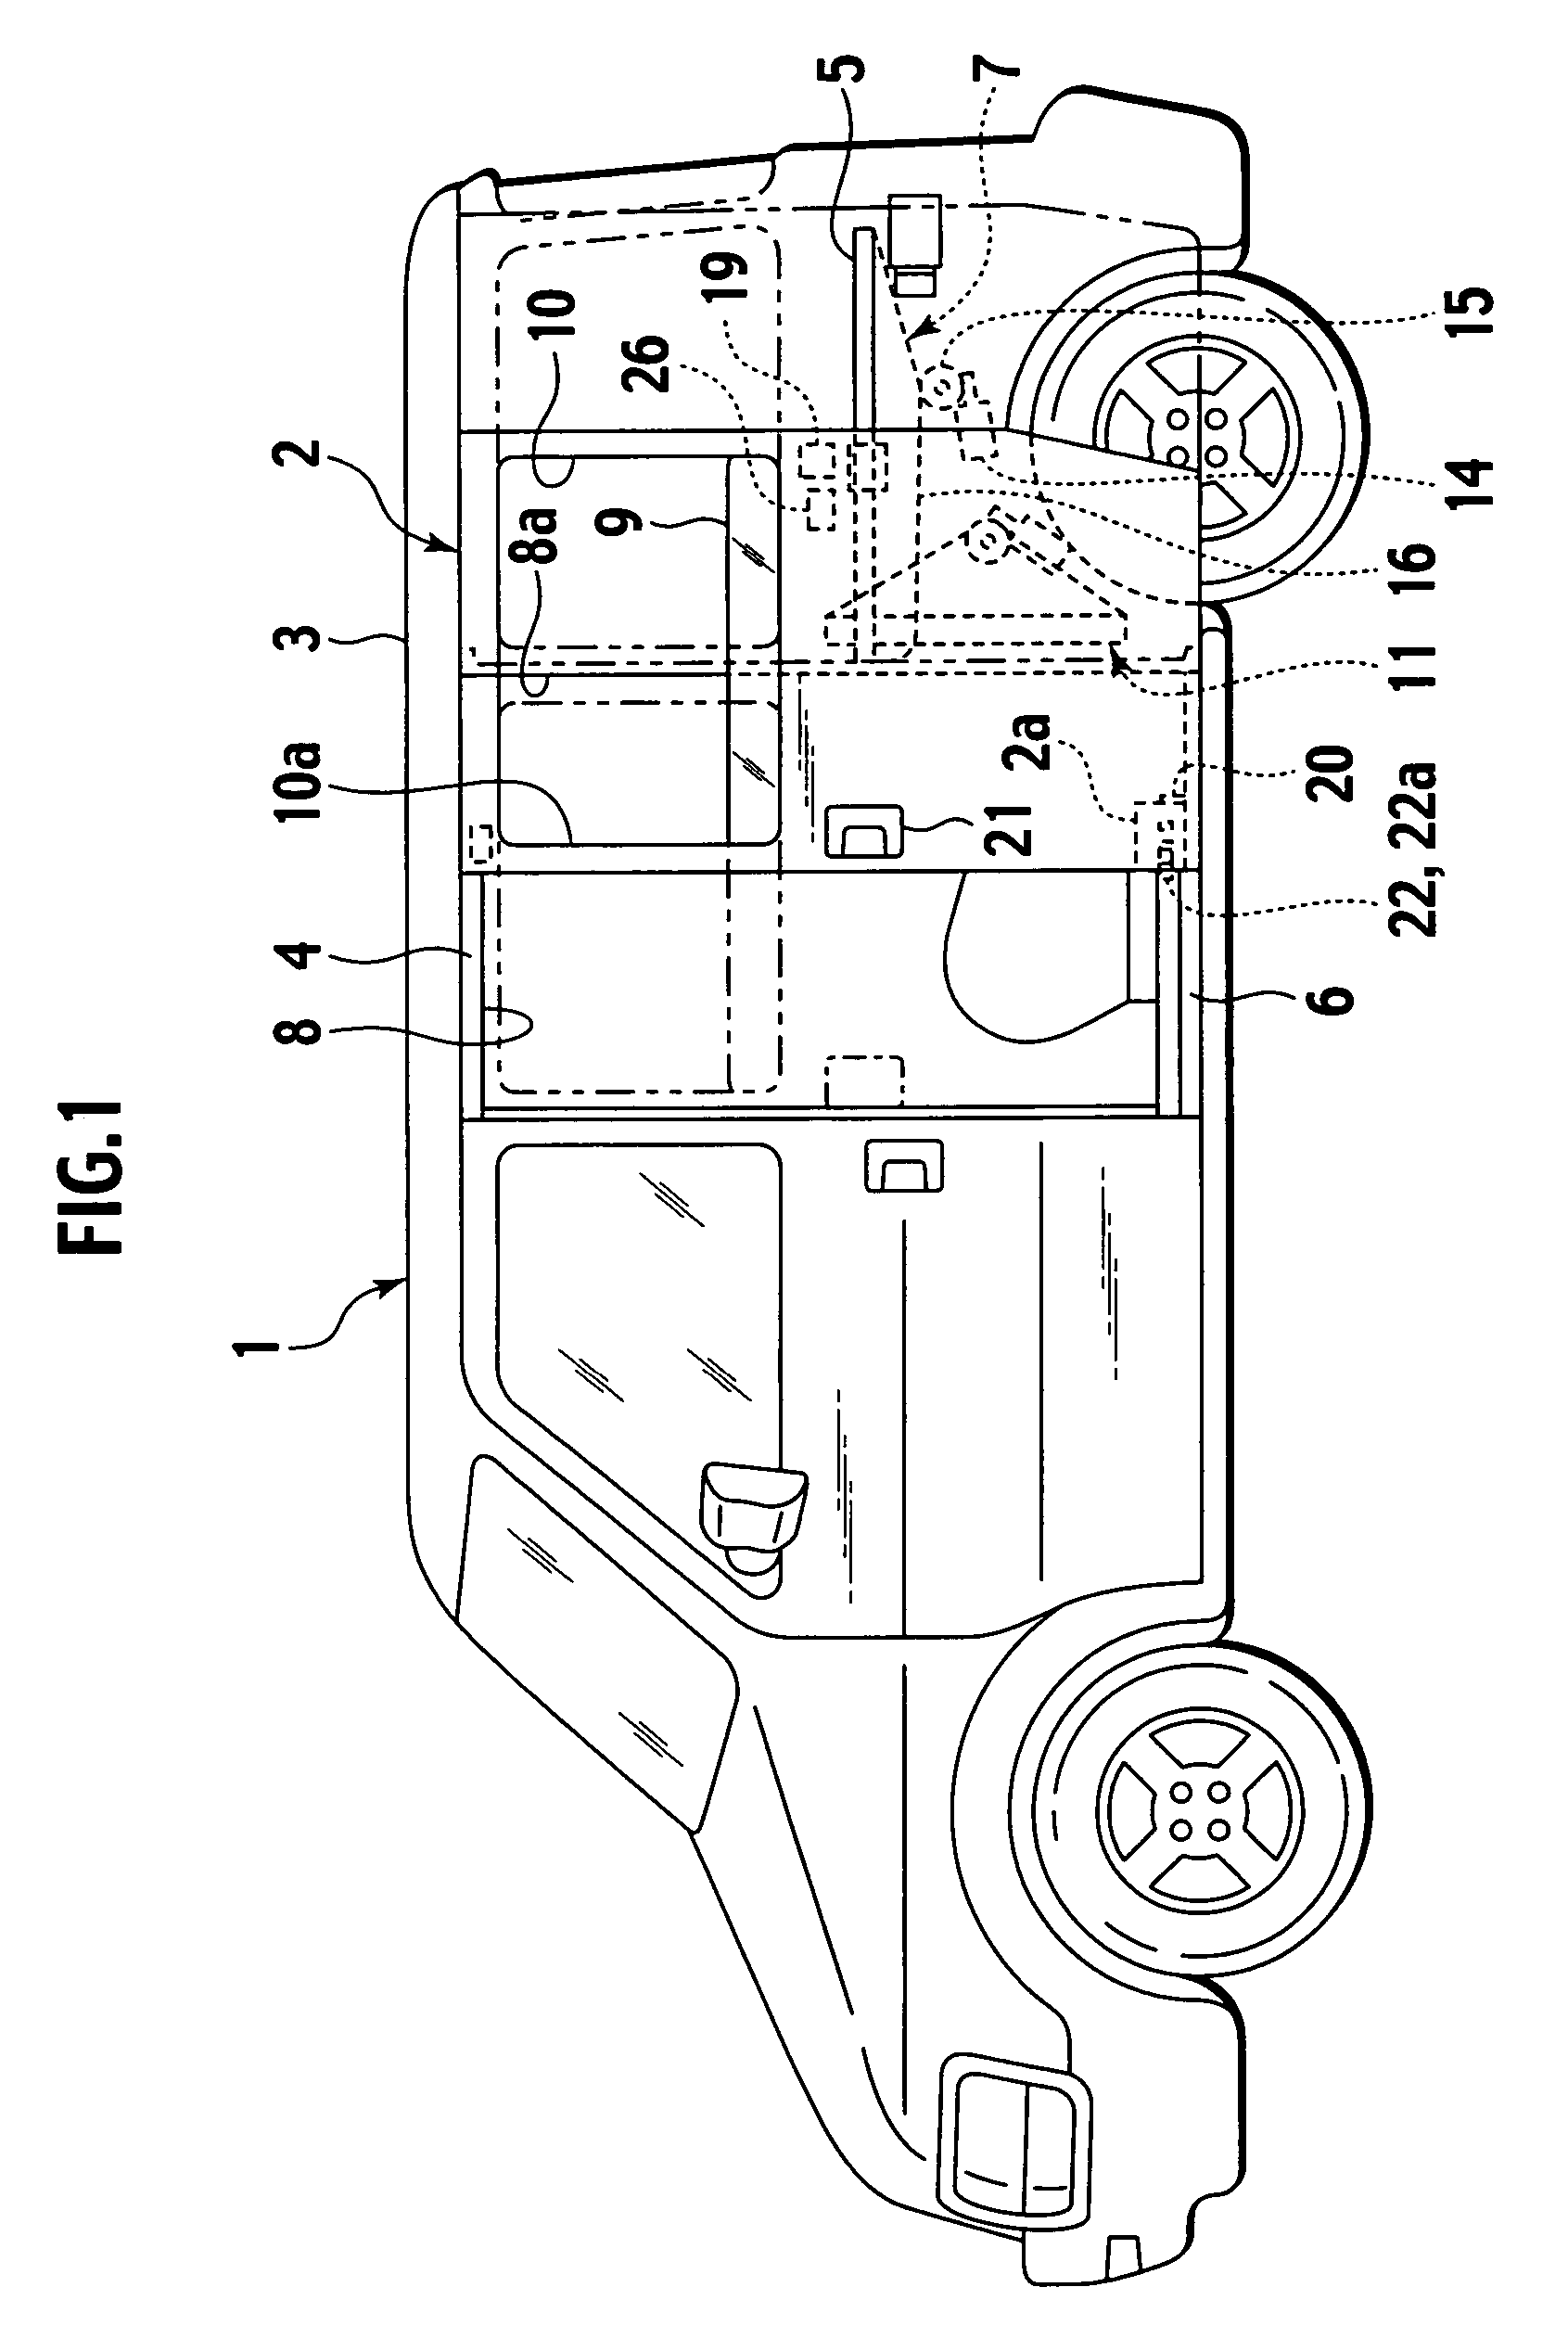 Half-open position holding apparatus for vehicle opening and closing member